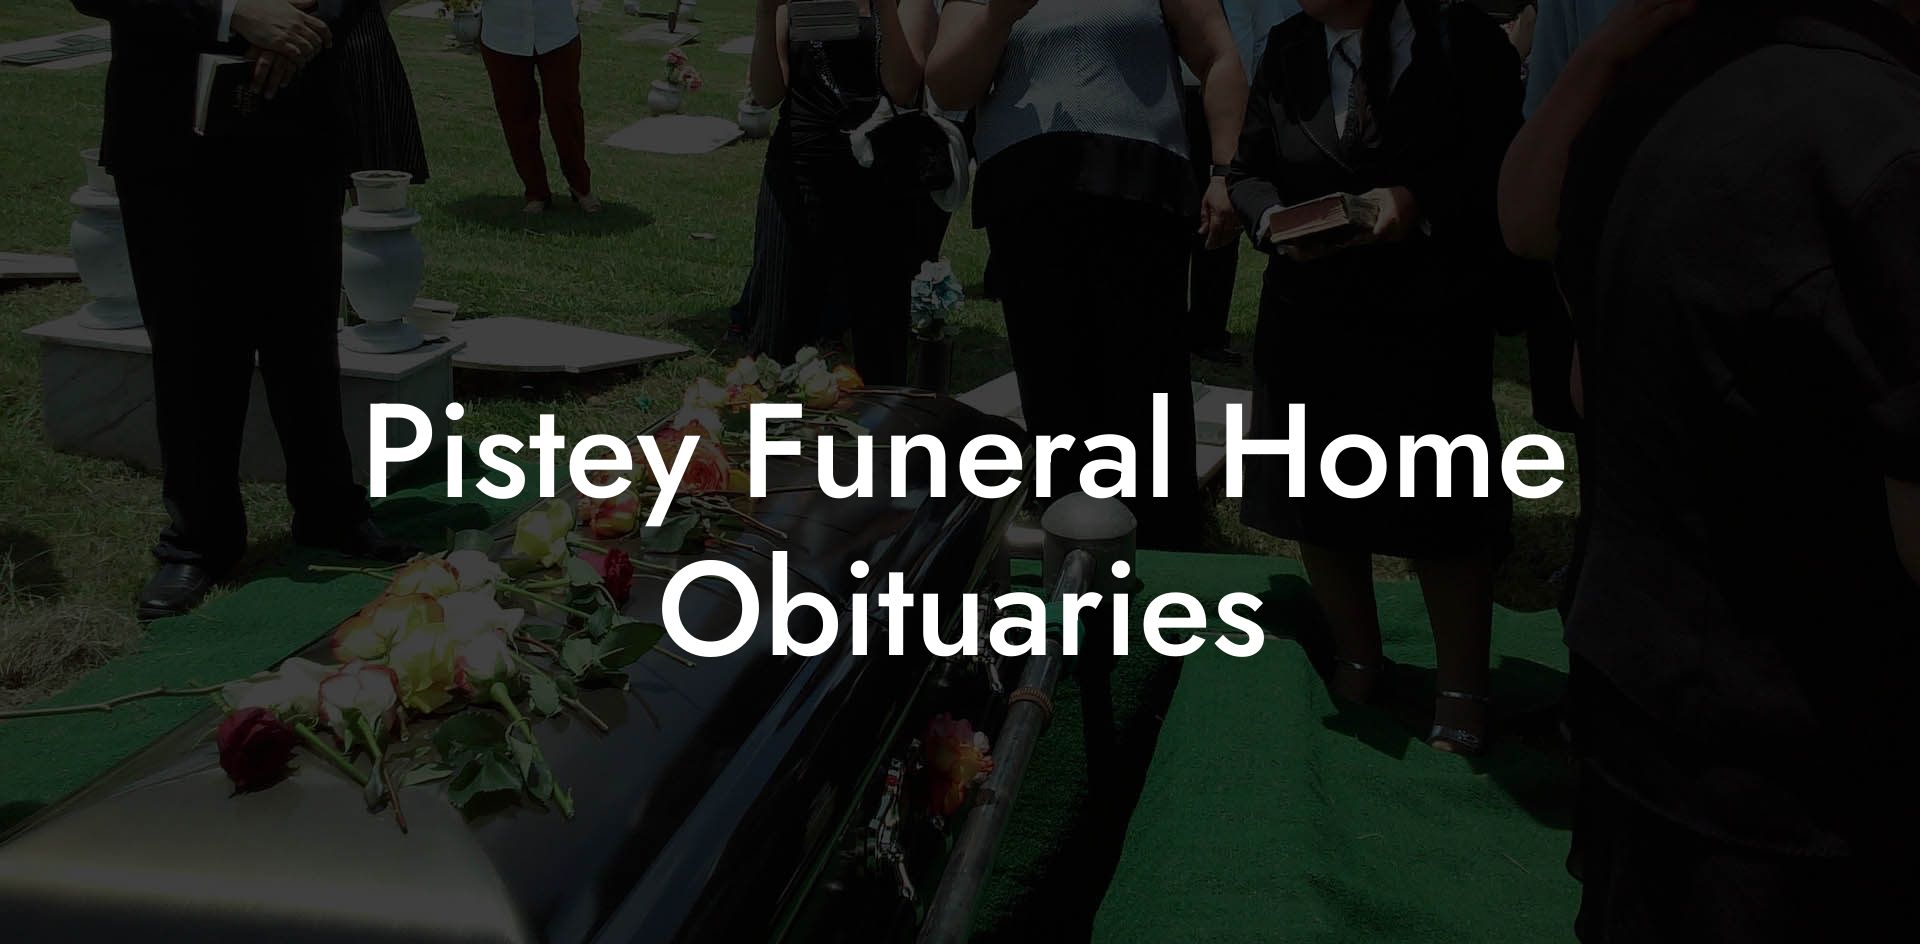 Pistey Funeral Home Obituaries